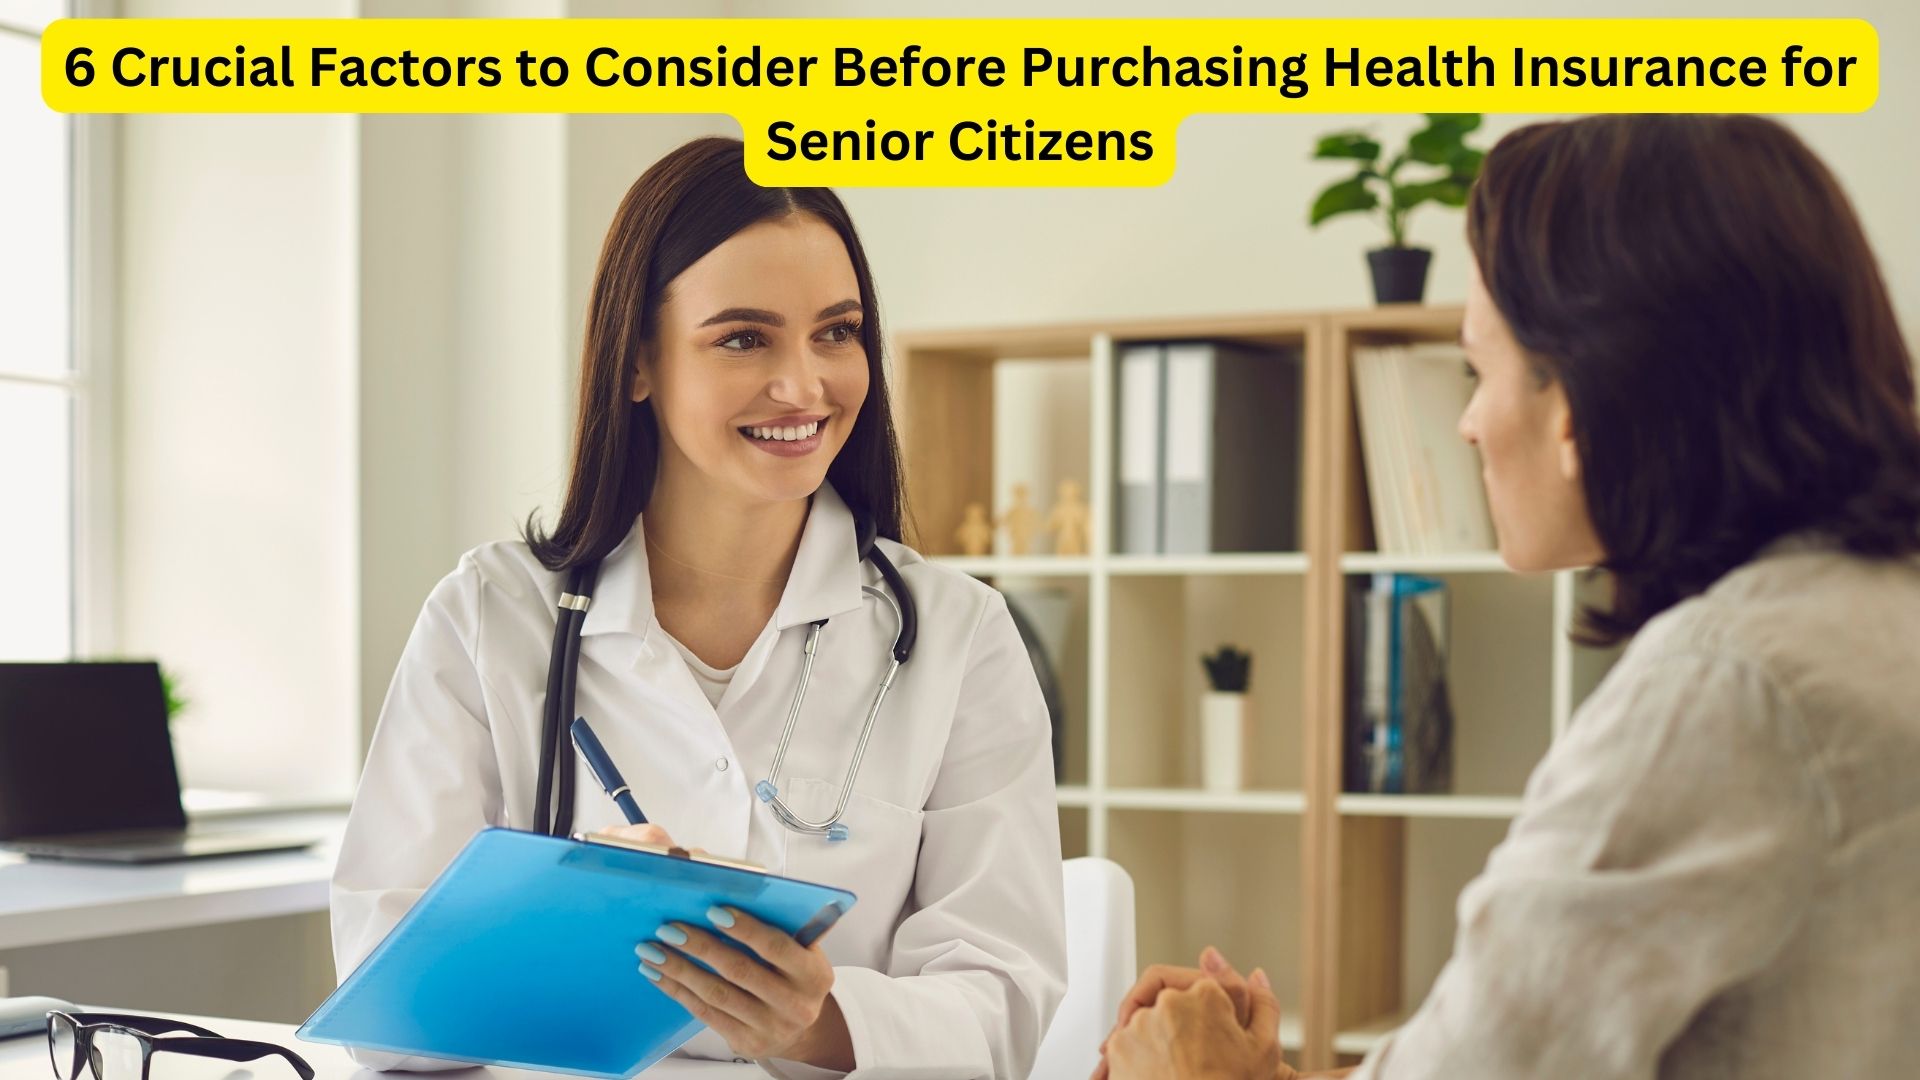 6 Crucial Factors to Consider Before Purchasing Health Insurance for Senior Citizens